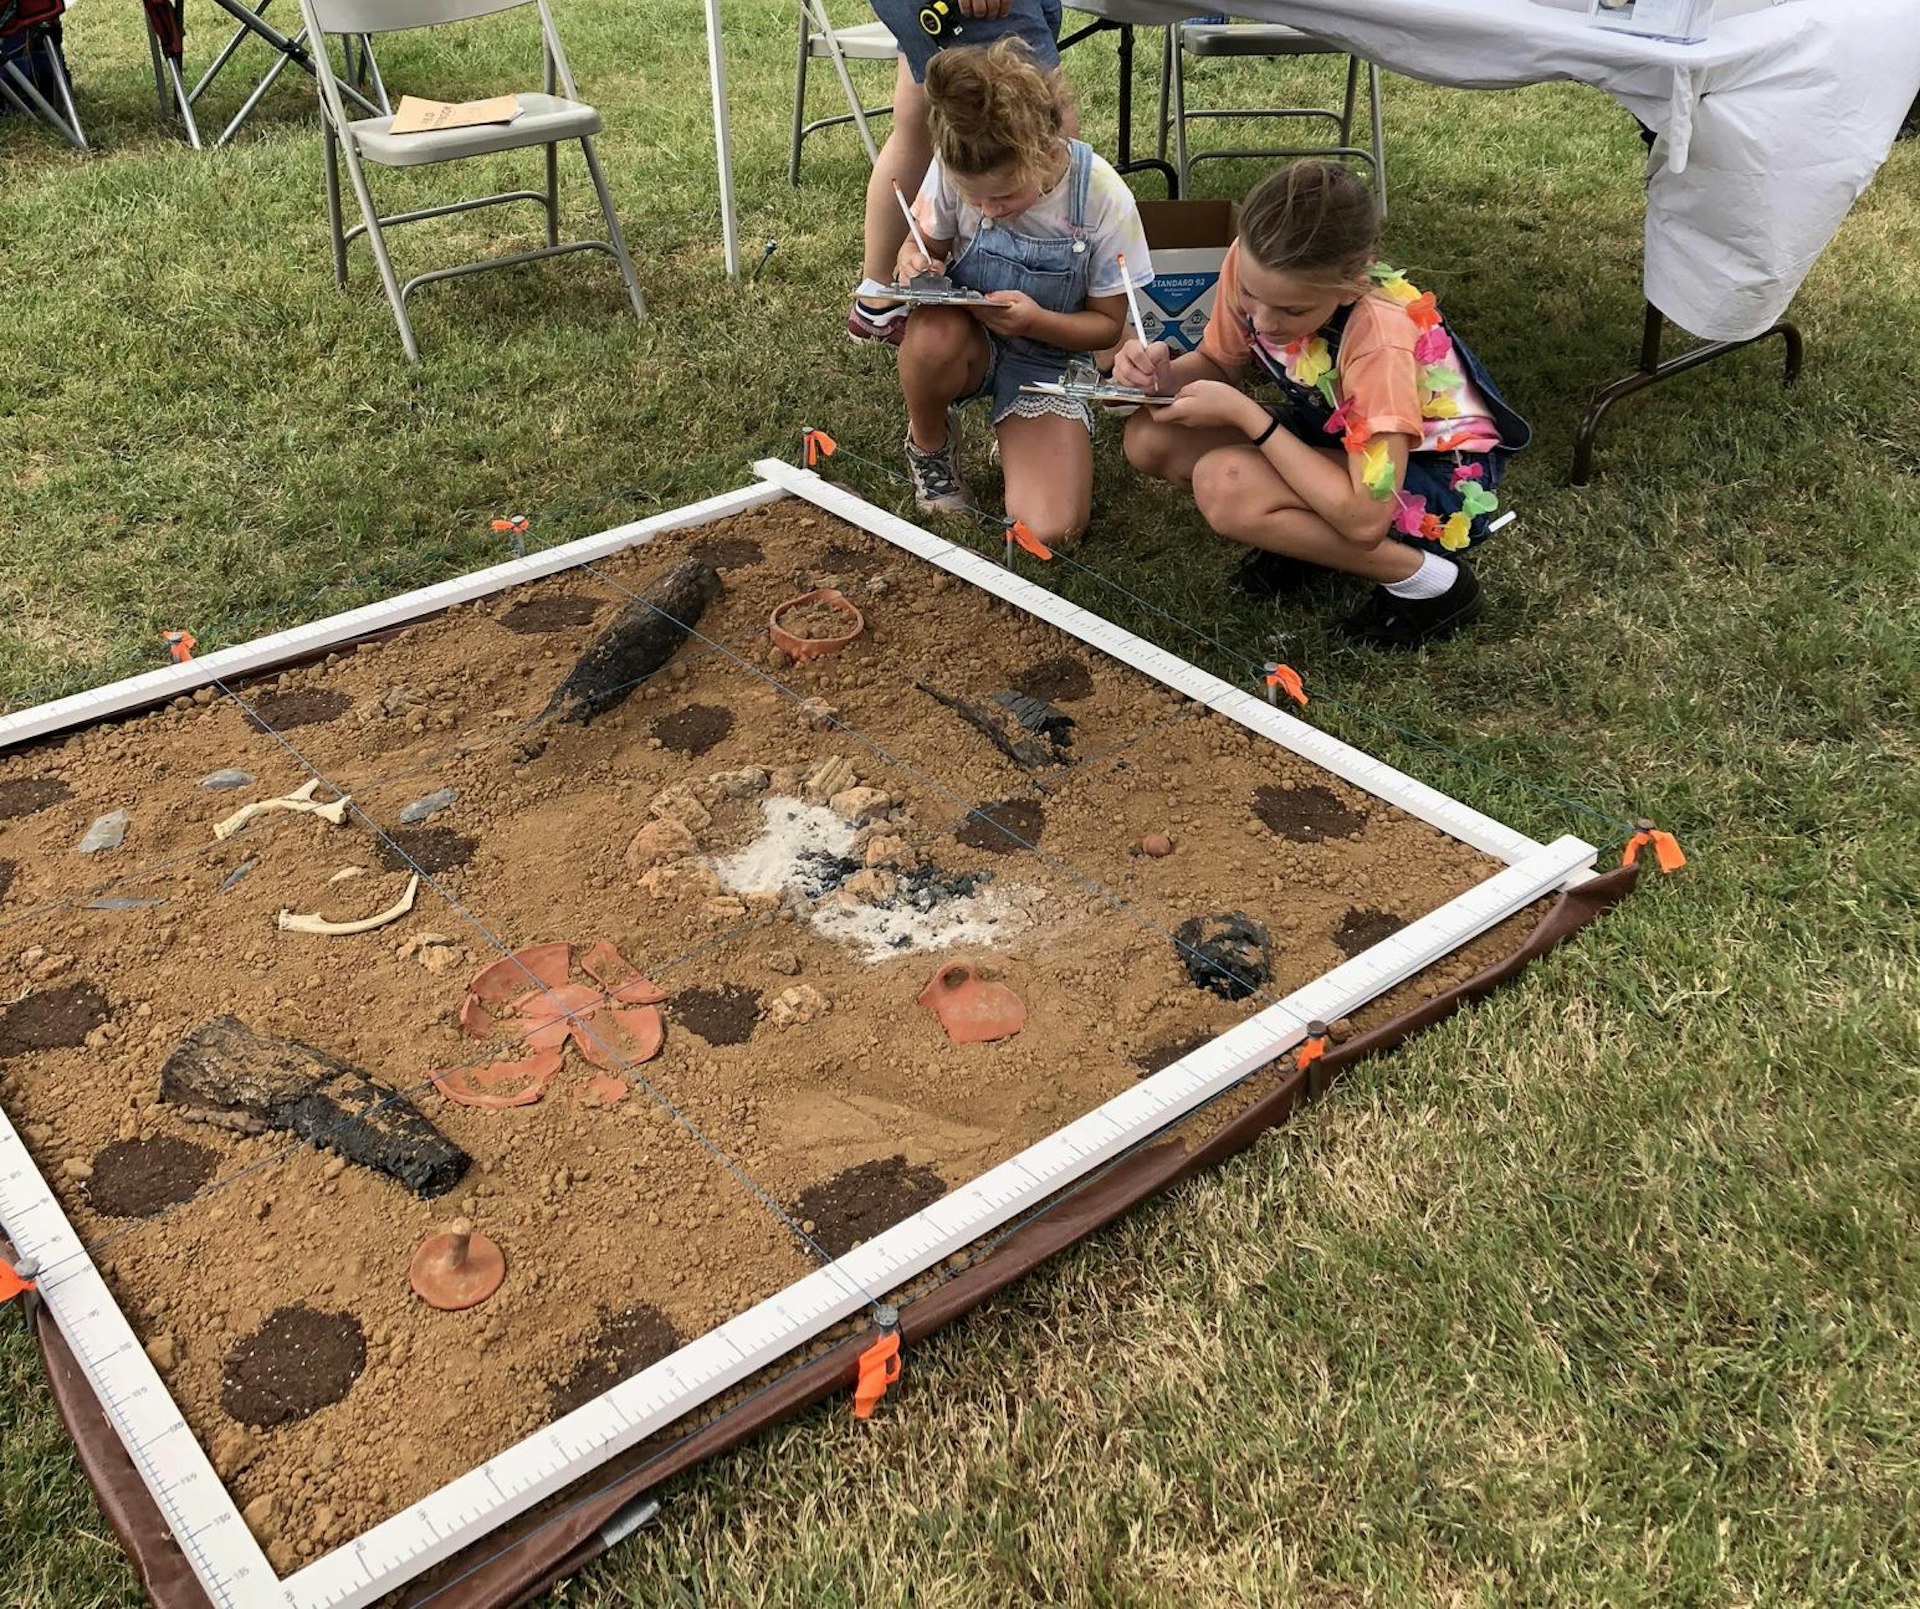 Children learn mapping skills with a replica archaeological house floor during Tennessee Archaeology Day at Bells Bend Park in Nashville, Tenn., Sept. 8, 2018.